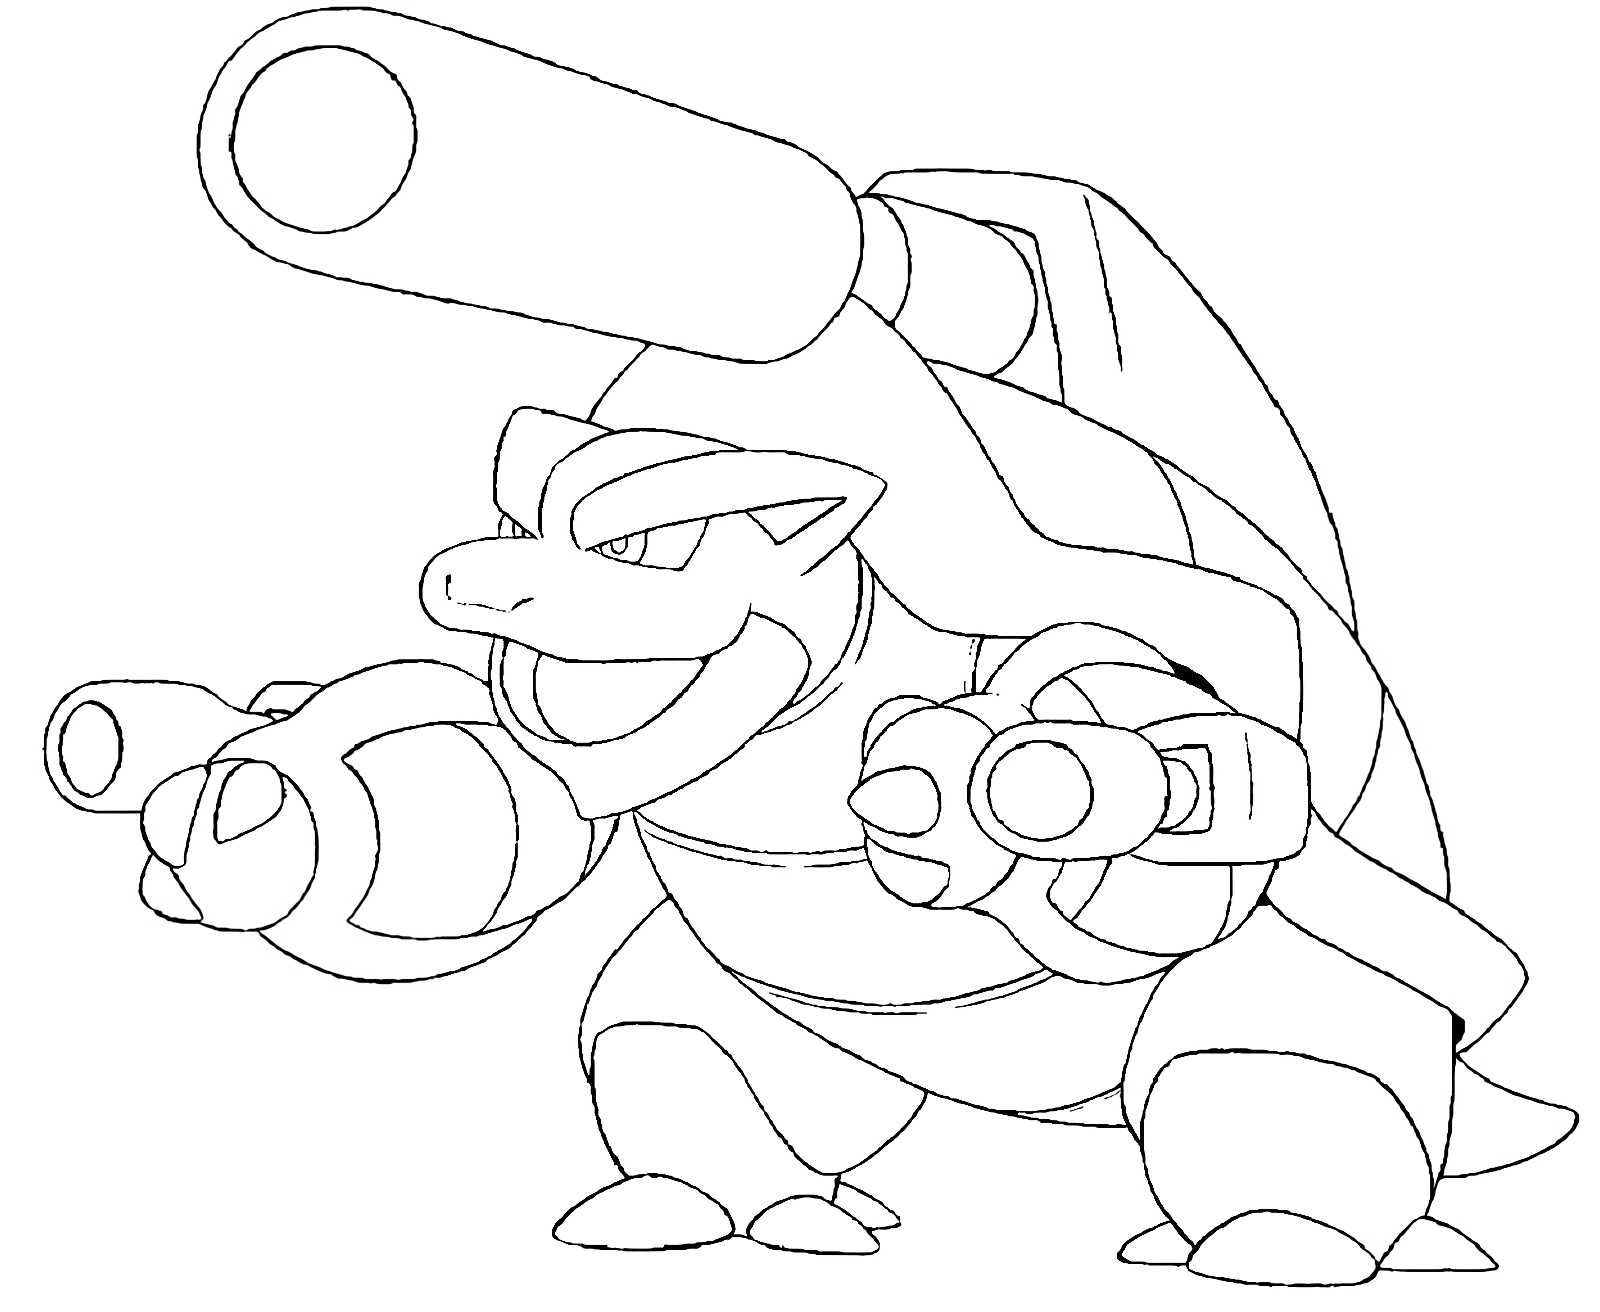 free-blastoise-coloring-pages-collection-free-pokemon-coloring-pages